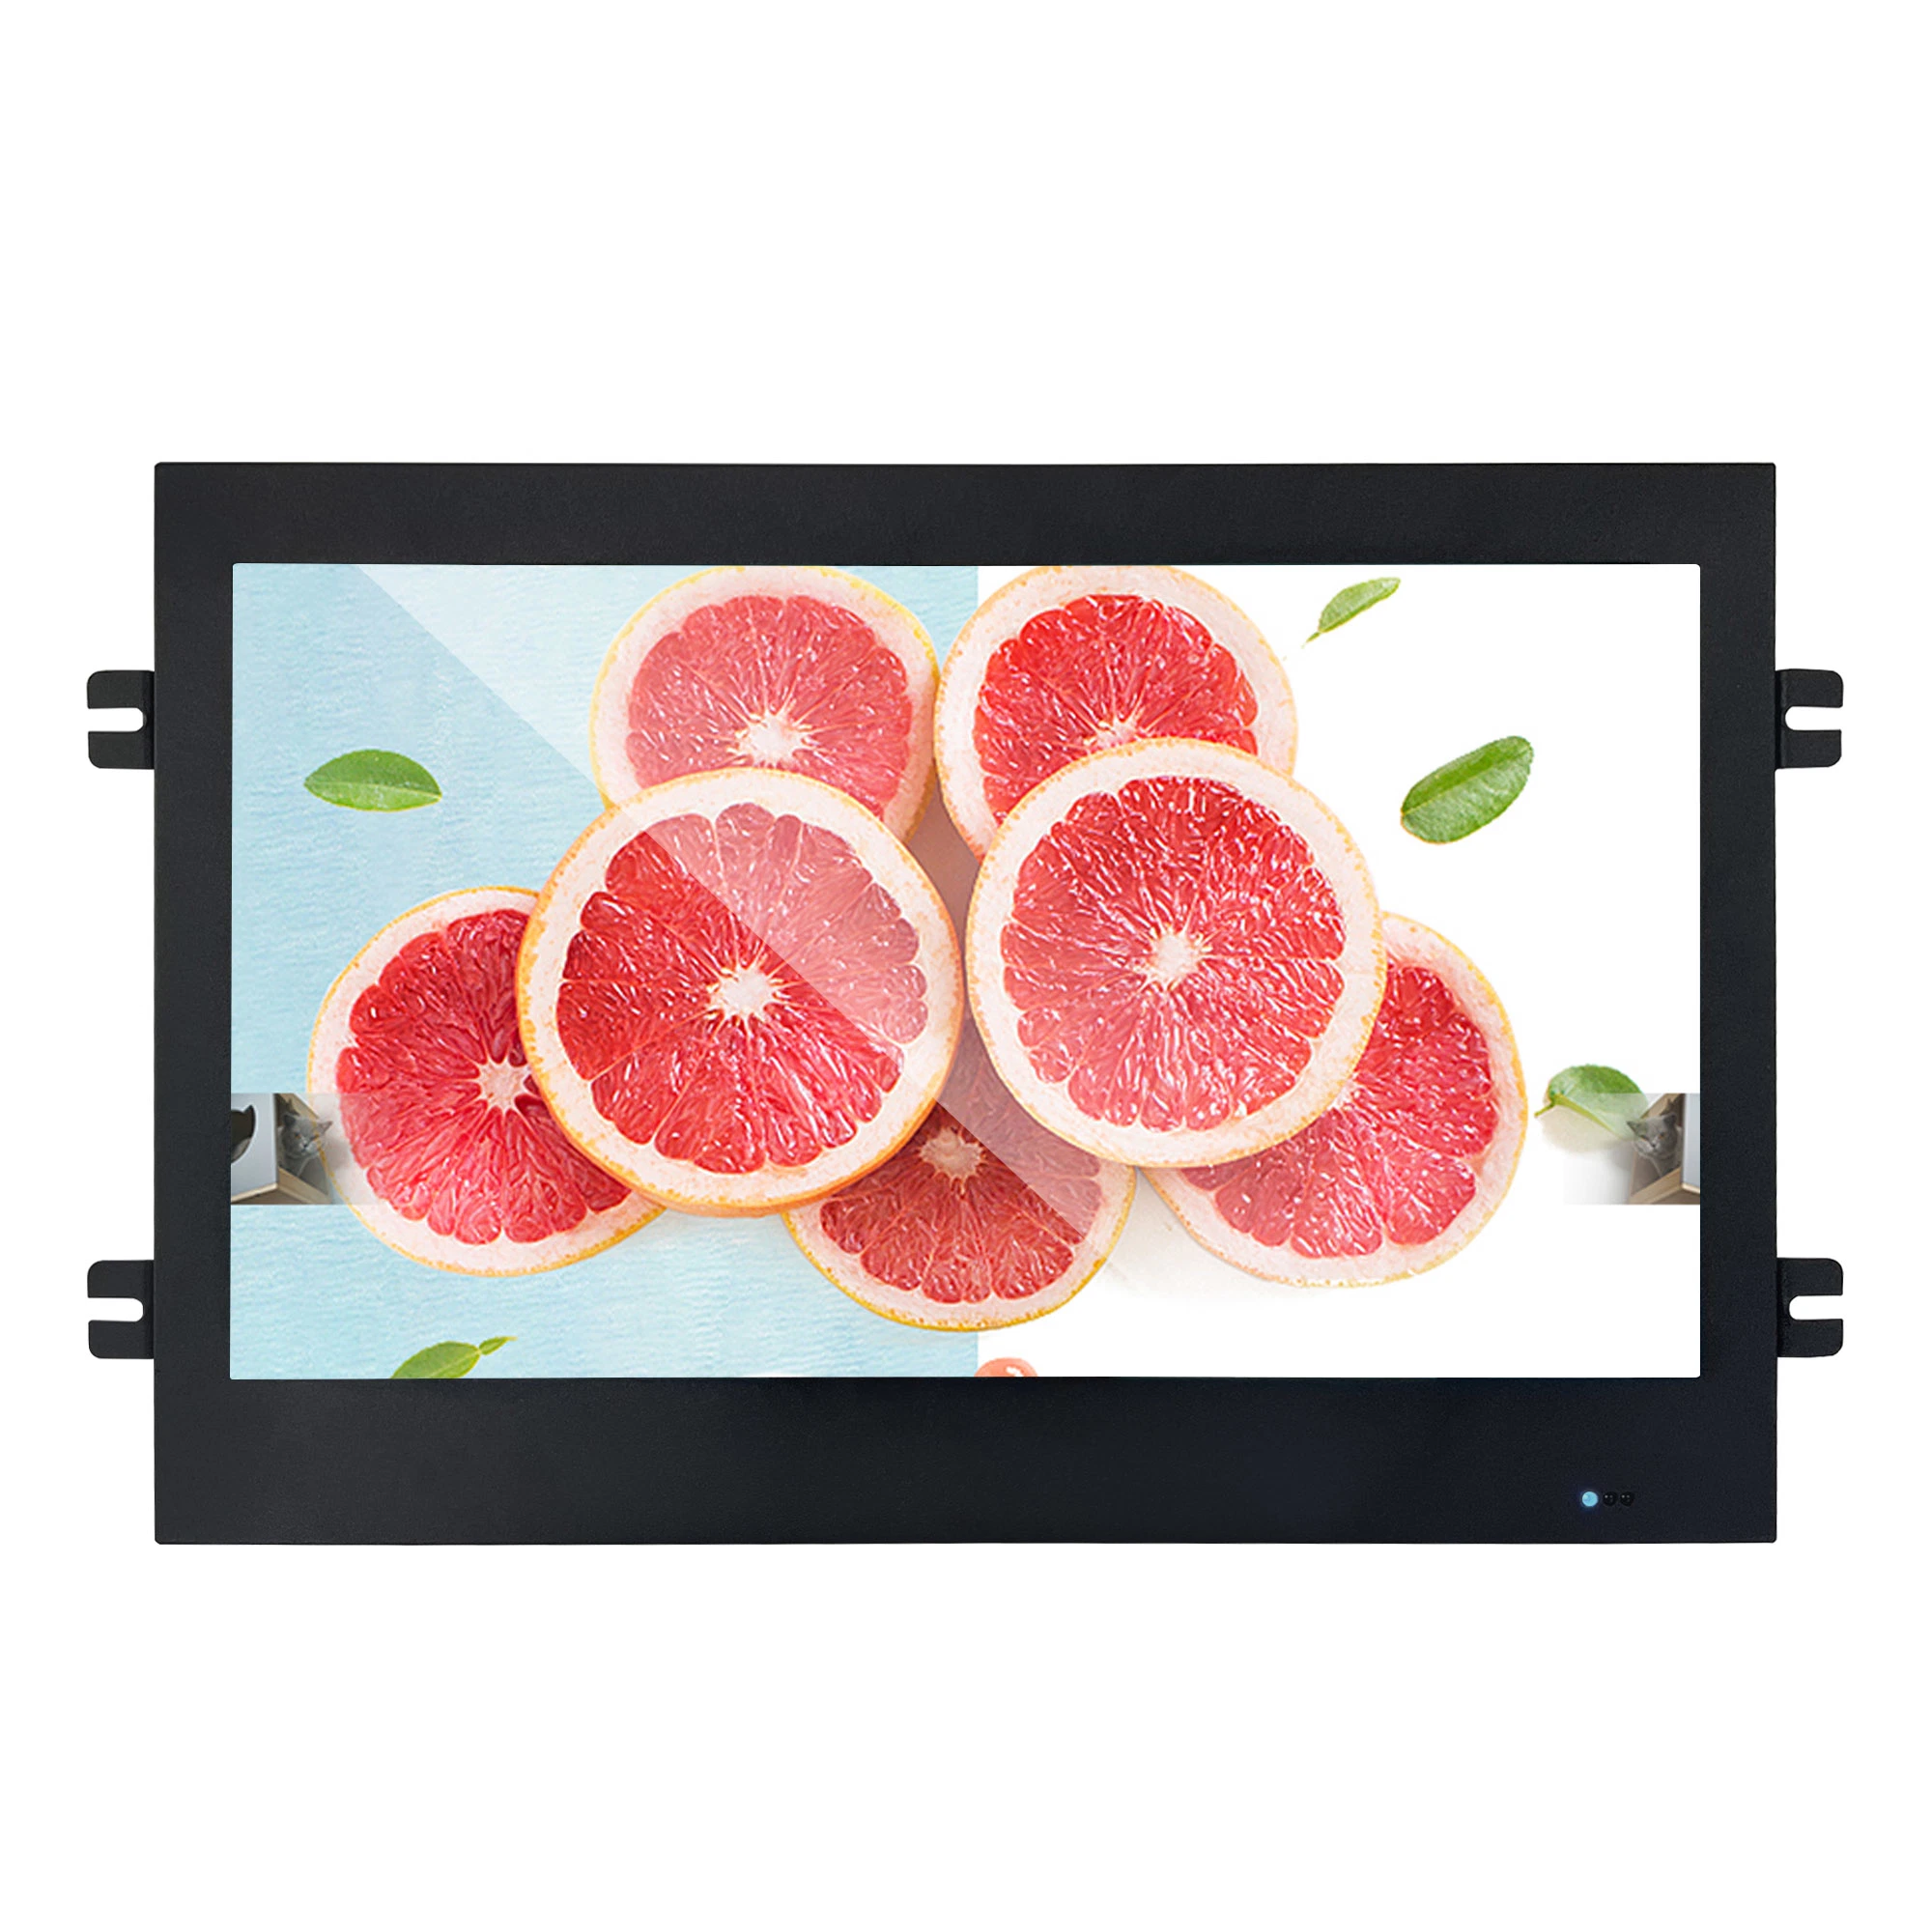 250 CD/M2 Brightness 13.3 Inch Touchscreen Open Frame Display with Tempered Glass